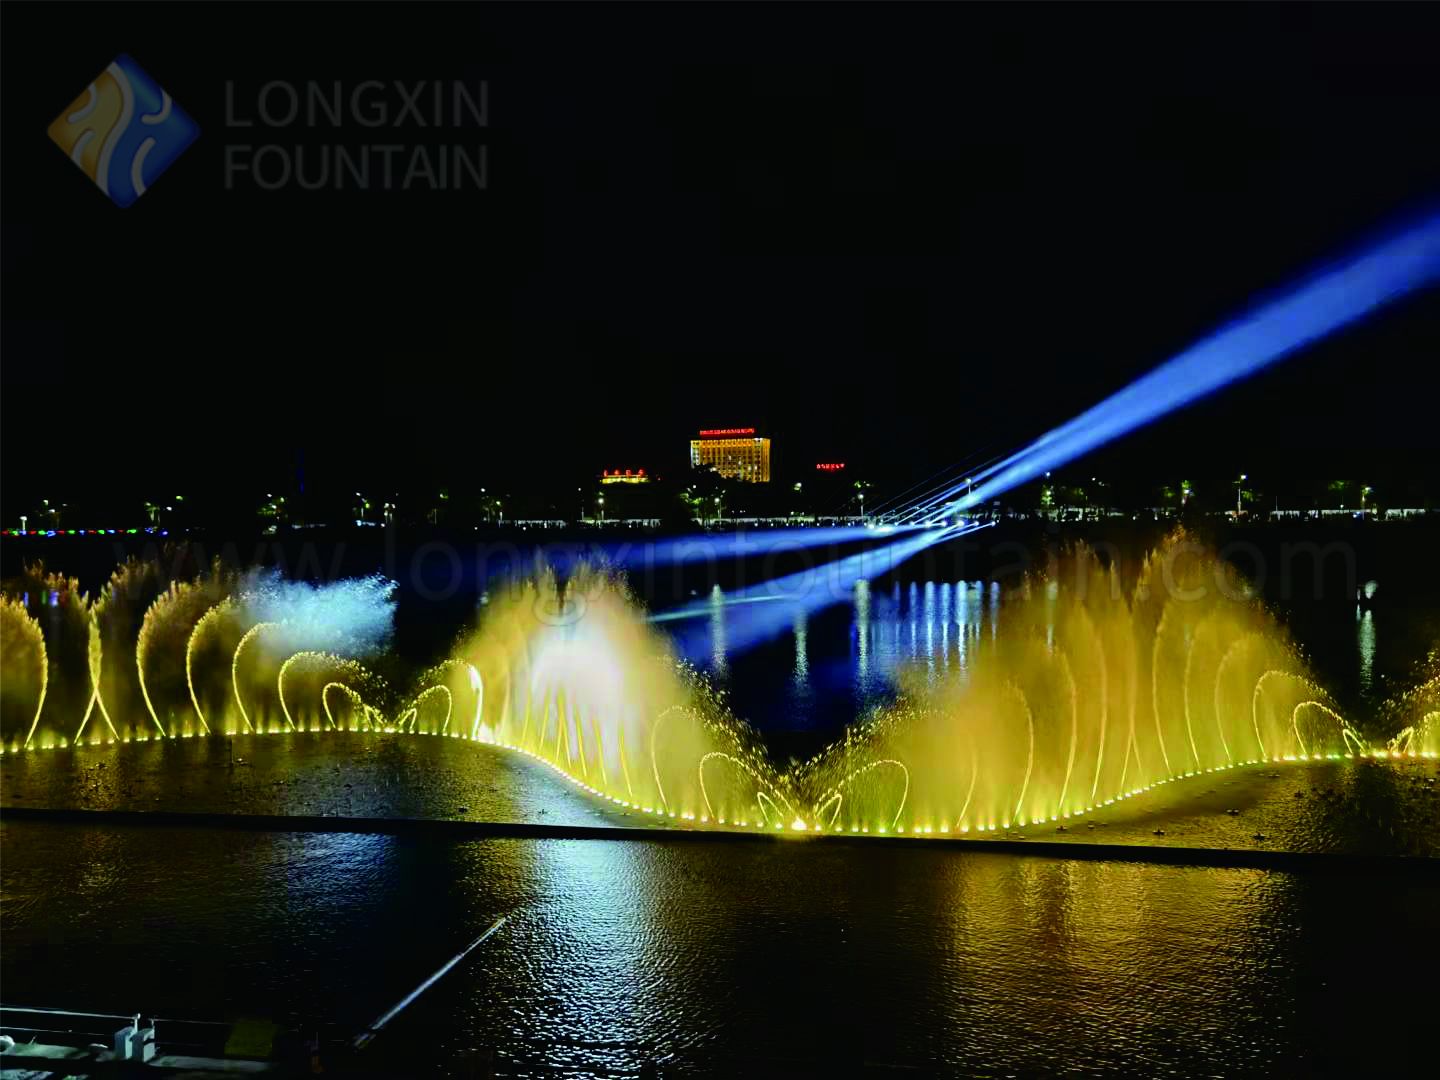 Cool and shocking! So beautiful! This Internet fashion music fountain, go viral on the internet, is here in Hainan!